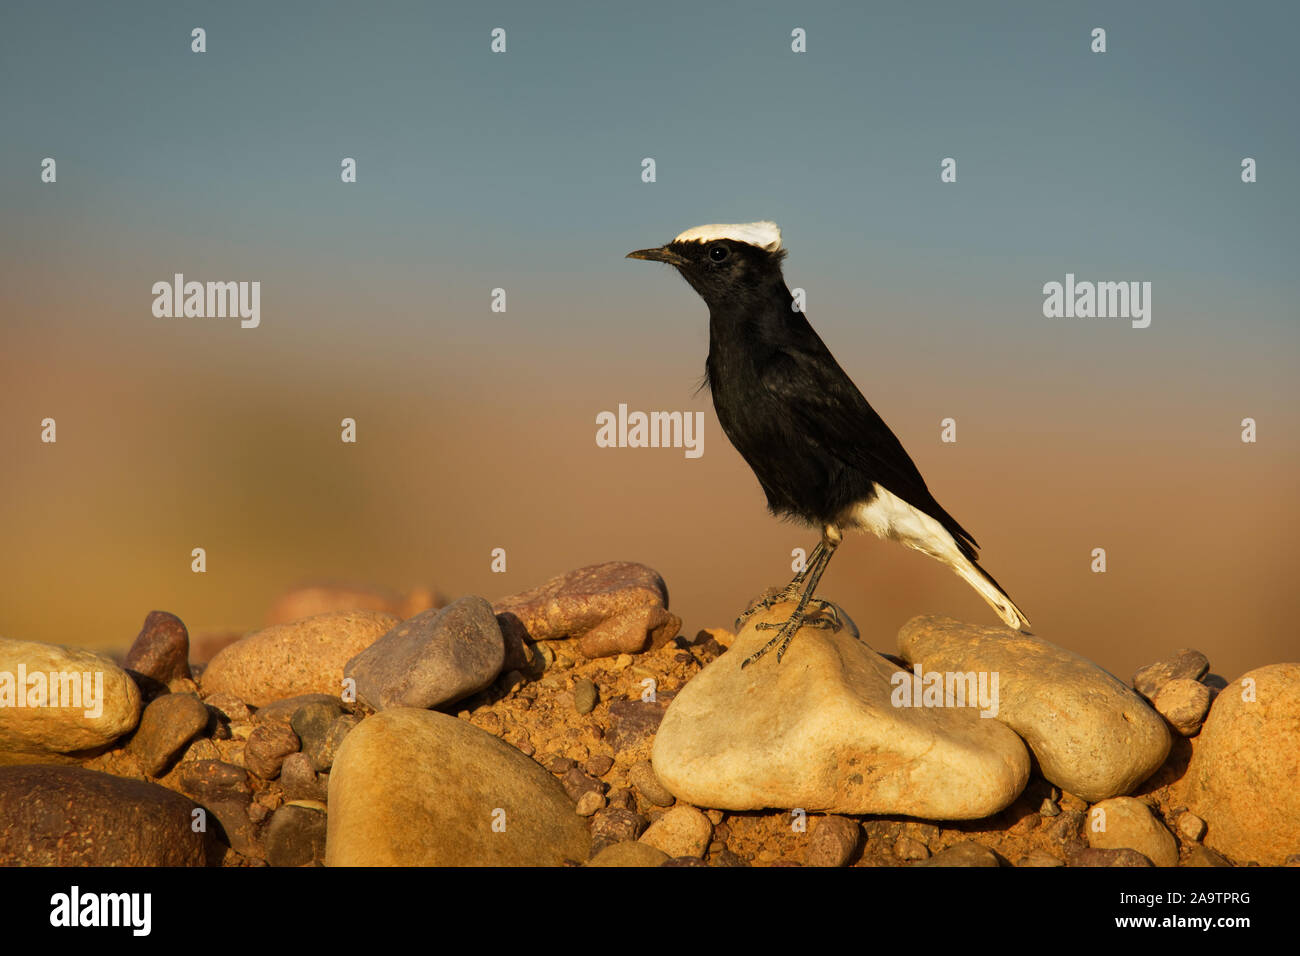 White-crowned wheatear - Oenanthe leucopyga black and white bird breeds in stony deserts from the Sahara and Arabia across to Iraq, largely resident, Stock Photo